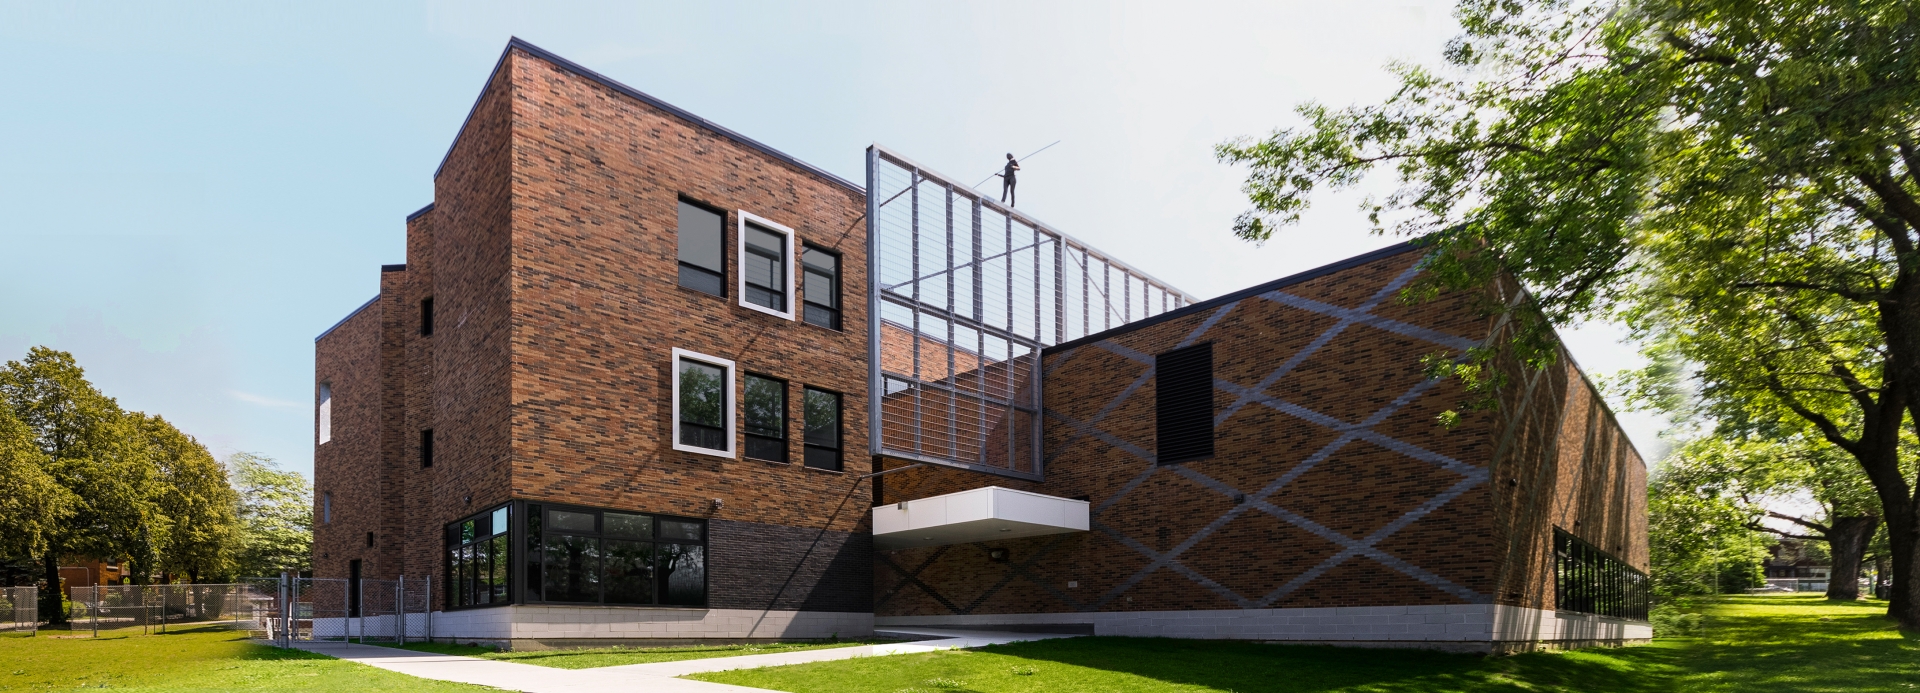 Barclay School | Expansion of the existing building | CSDM